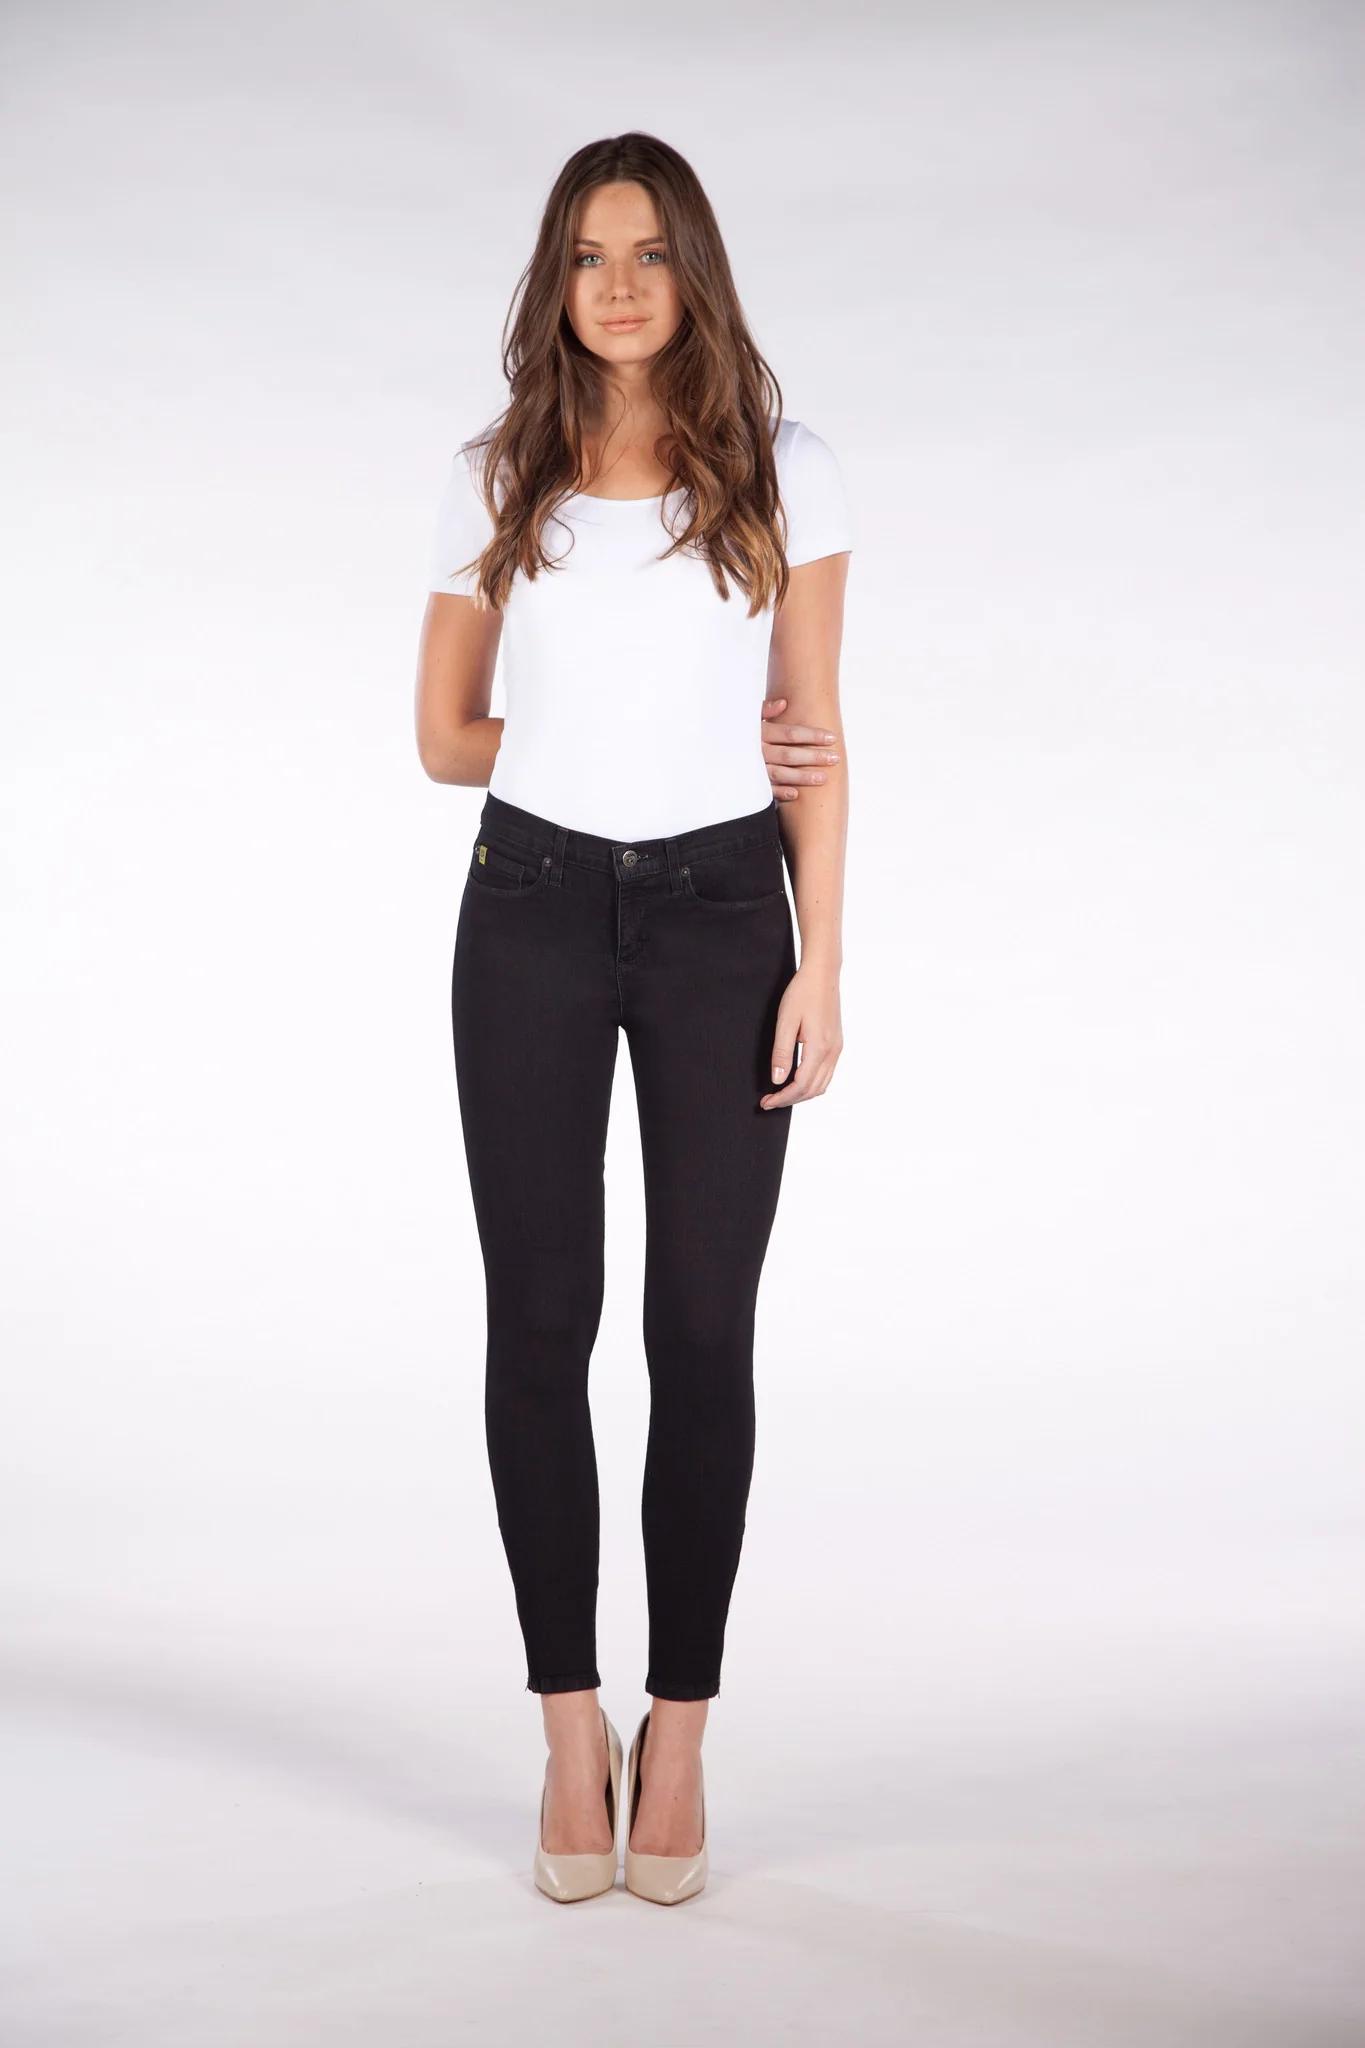 yoga jeans canada - What cut of jeans are in style 2023